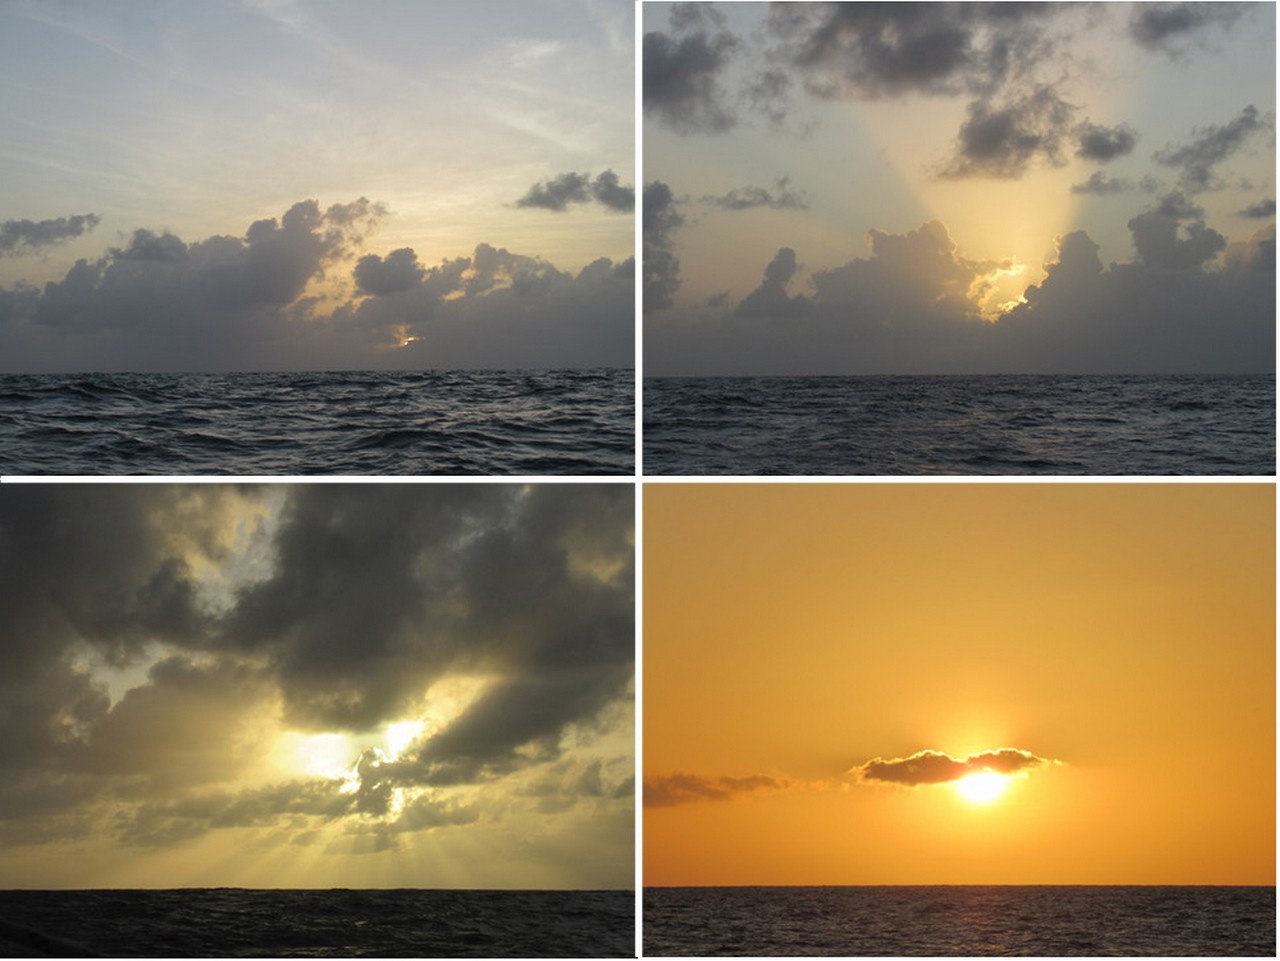 Rainy Suriname sunsets are replaced by Caribbean green flashes.